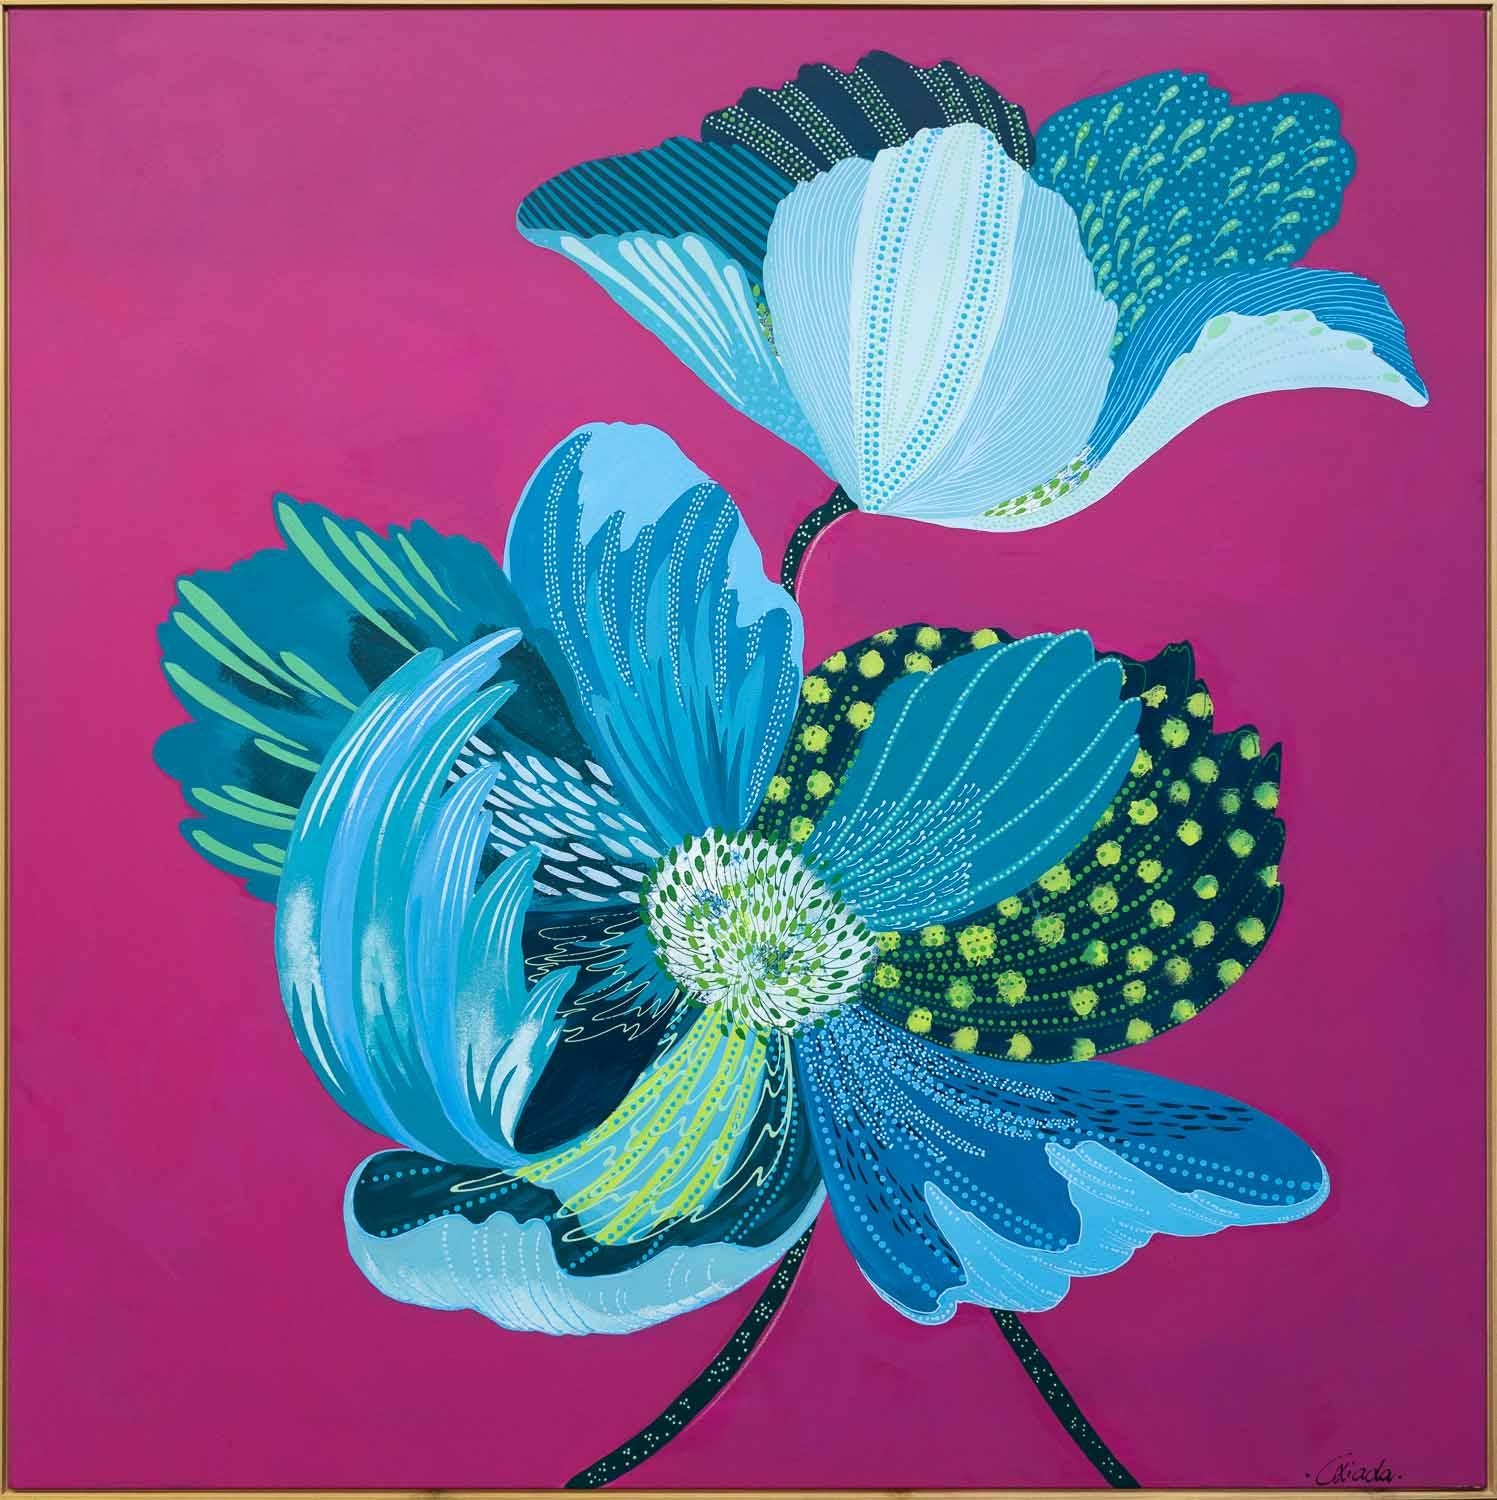 Tropical Exotic by Giada Pasquetto, Painted in 2022